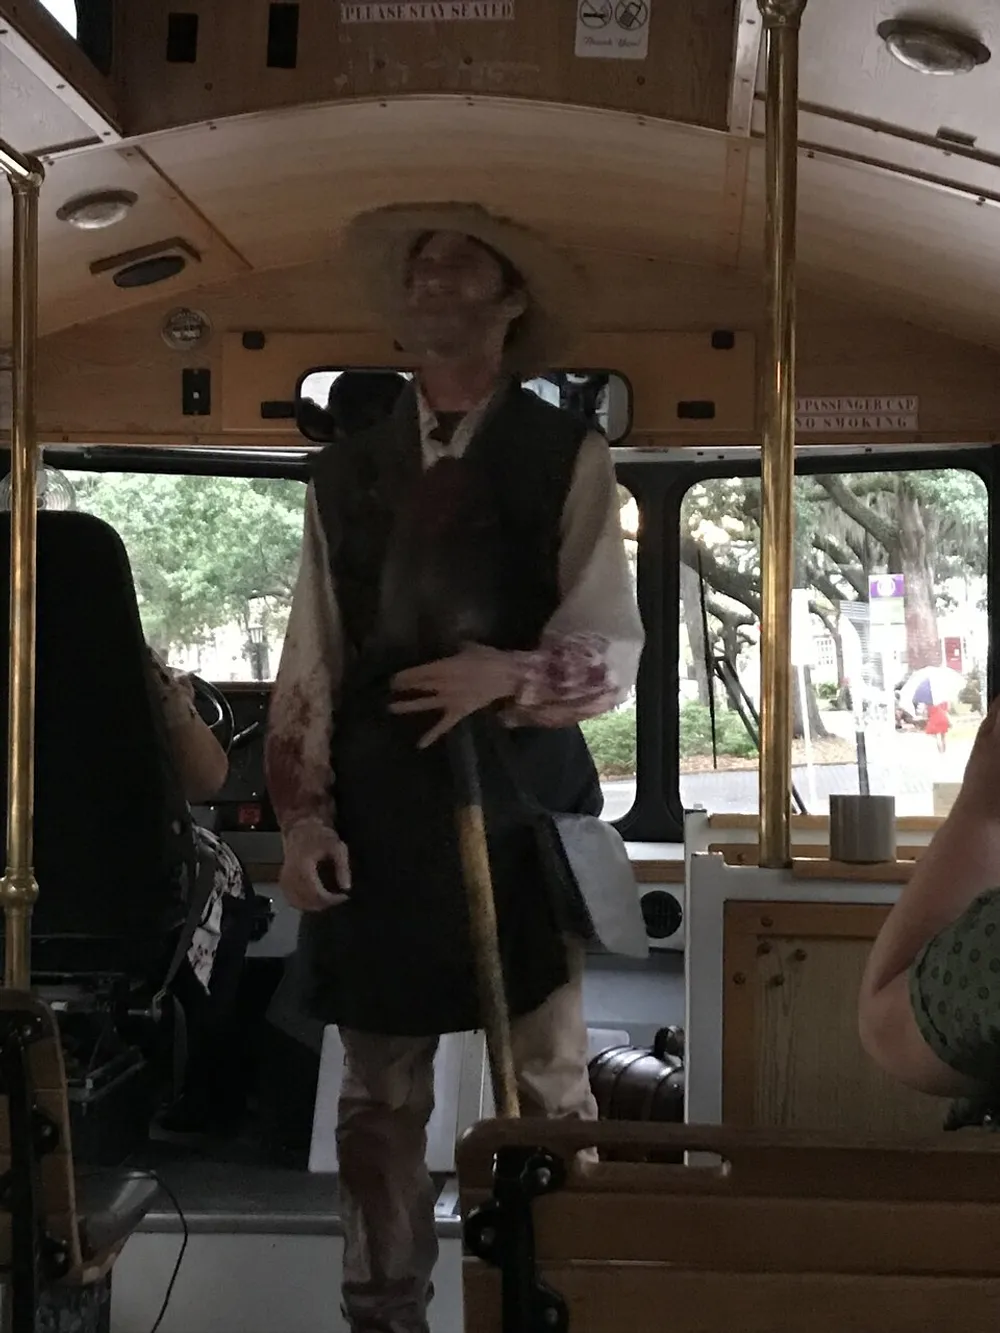 A person in period clothing potentially a tour guide is standing in the aisle of a trolley bus addressing the passengers